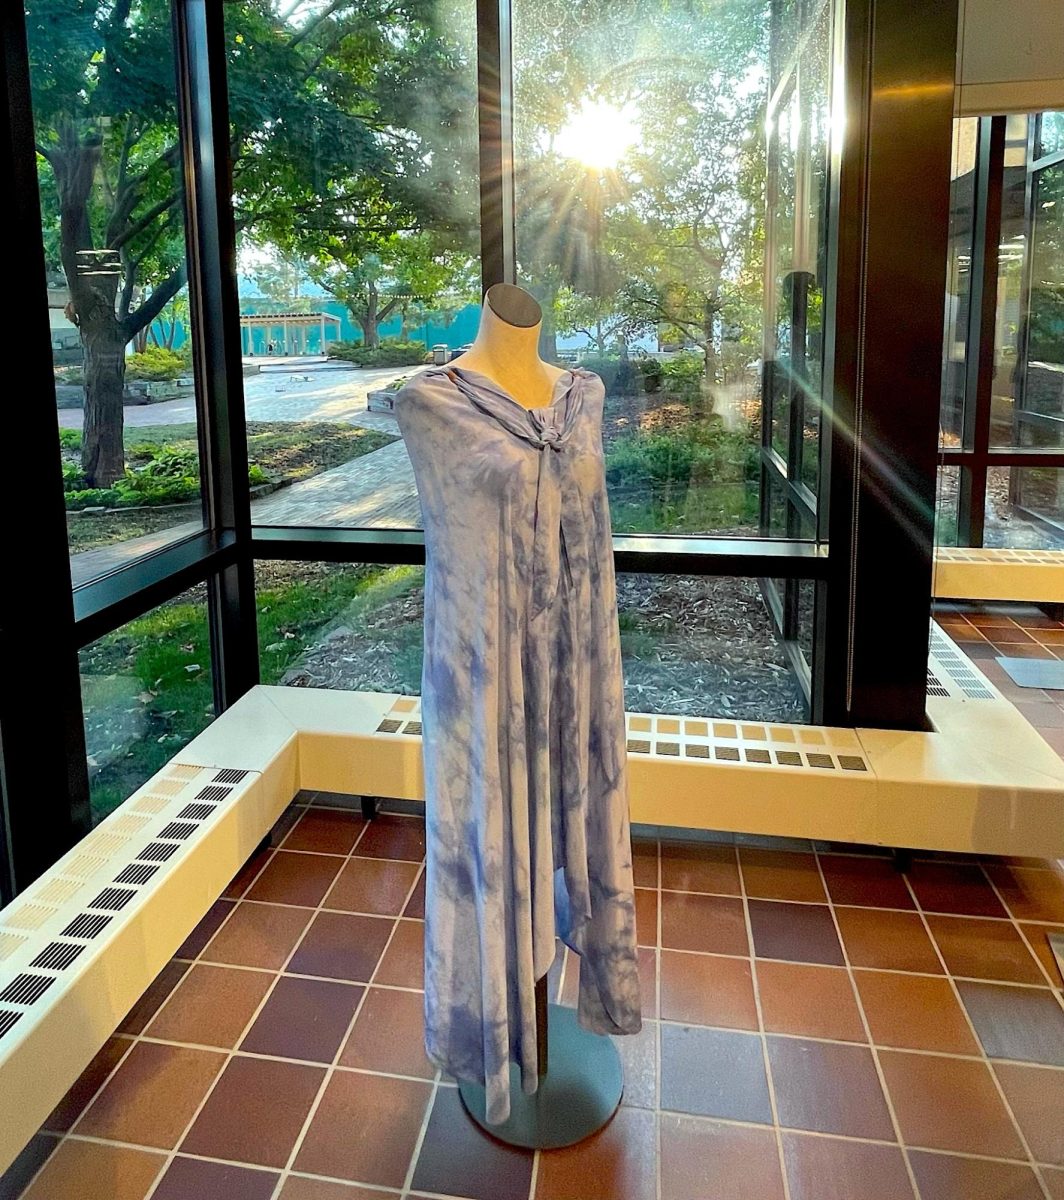 Nicole Callahan Rattner (‘03) launched a women’s clothing line that uses natural silk fibers in place of toxic artificial alternatives, hoping to inspire a sustainable change throughout the apparel market.